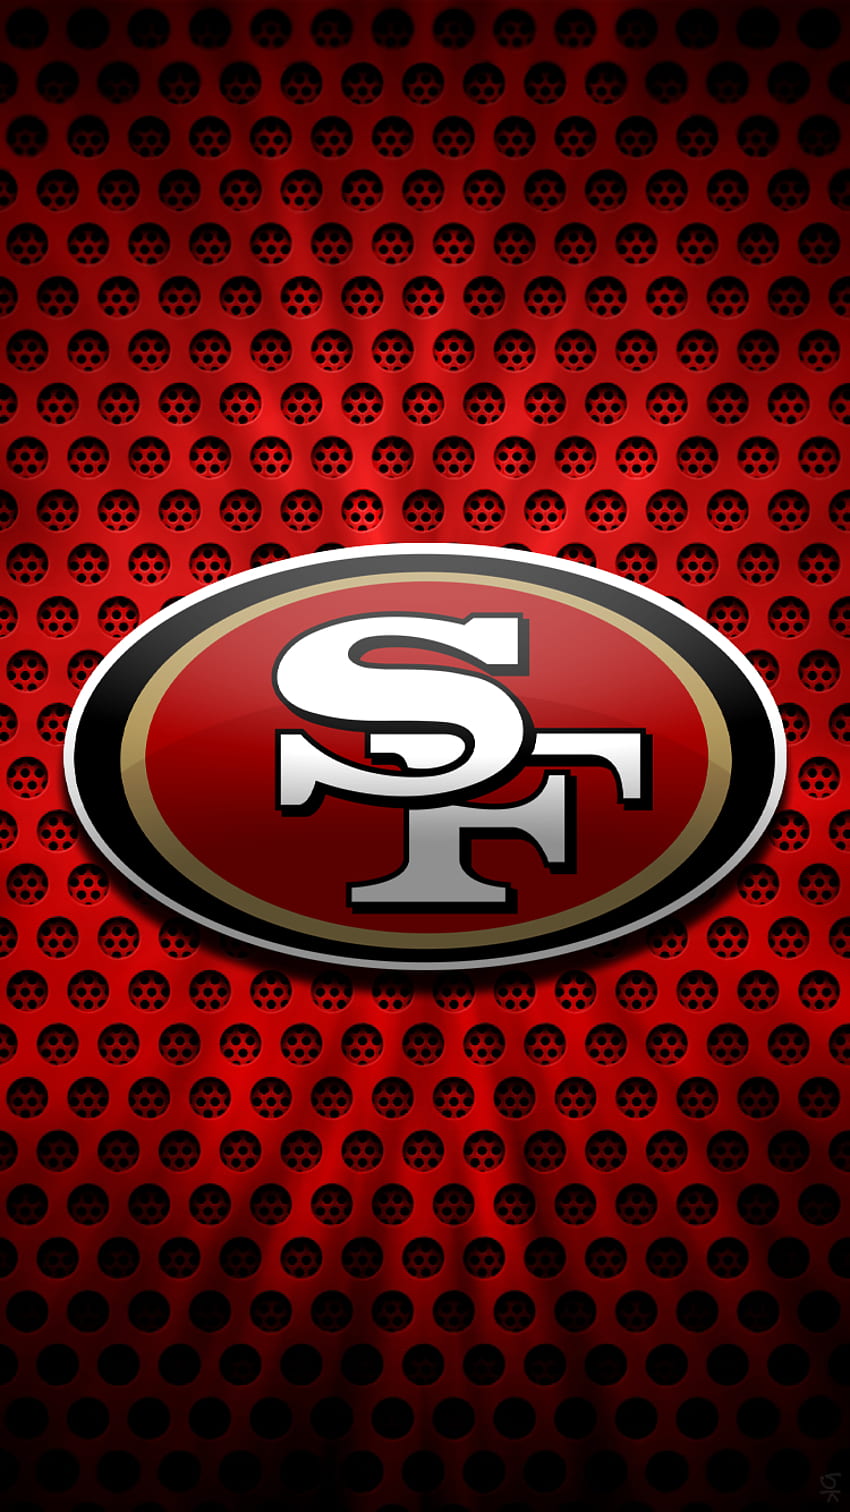 49ers Wallpaper for mobile phone tablet desktop computer and other  devices HD and 4K wallpapers  Iphone wallpaper Wallpaper 49ers pictures